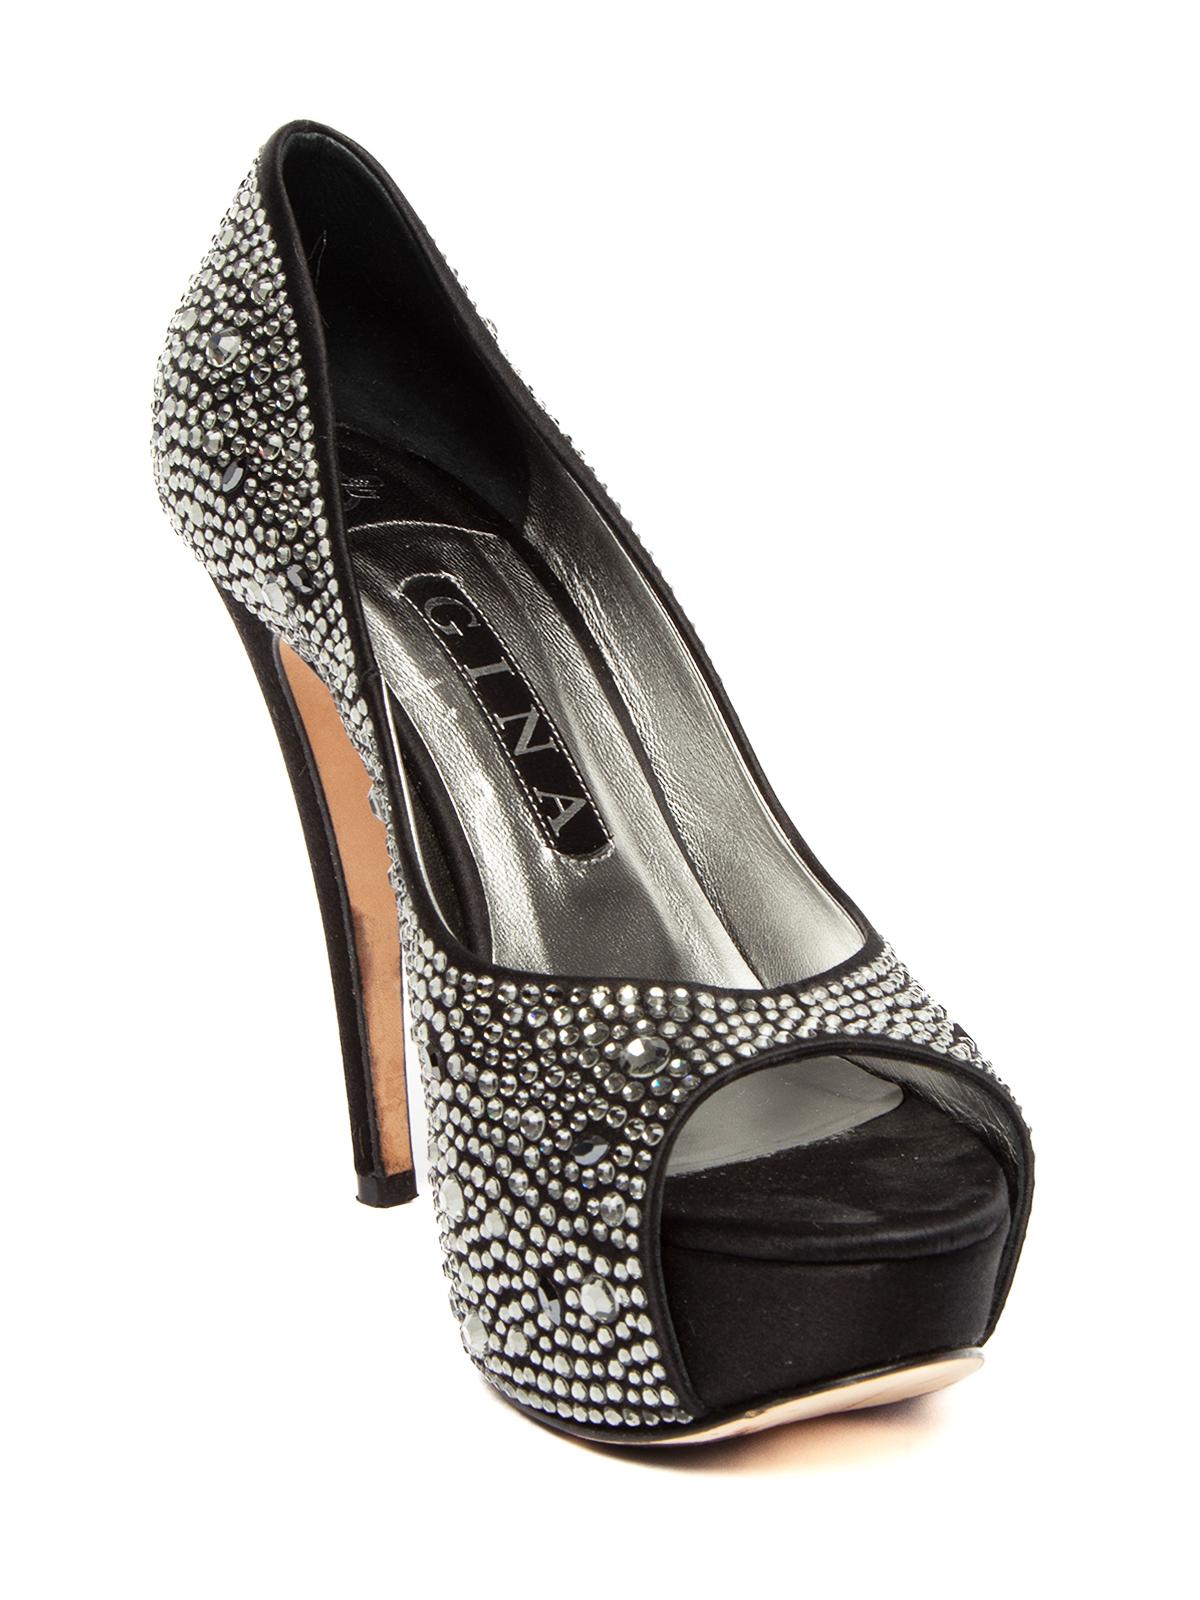 CONDITION is Good. Some wear to heels is evident. Creases to interior leather, and wear to outer sole on this used Gina designer resale item. Details Black/Silver Satin/ leather Platform Peep toe Crystals embellished on satin Stiletto heel Leather